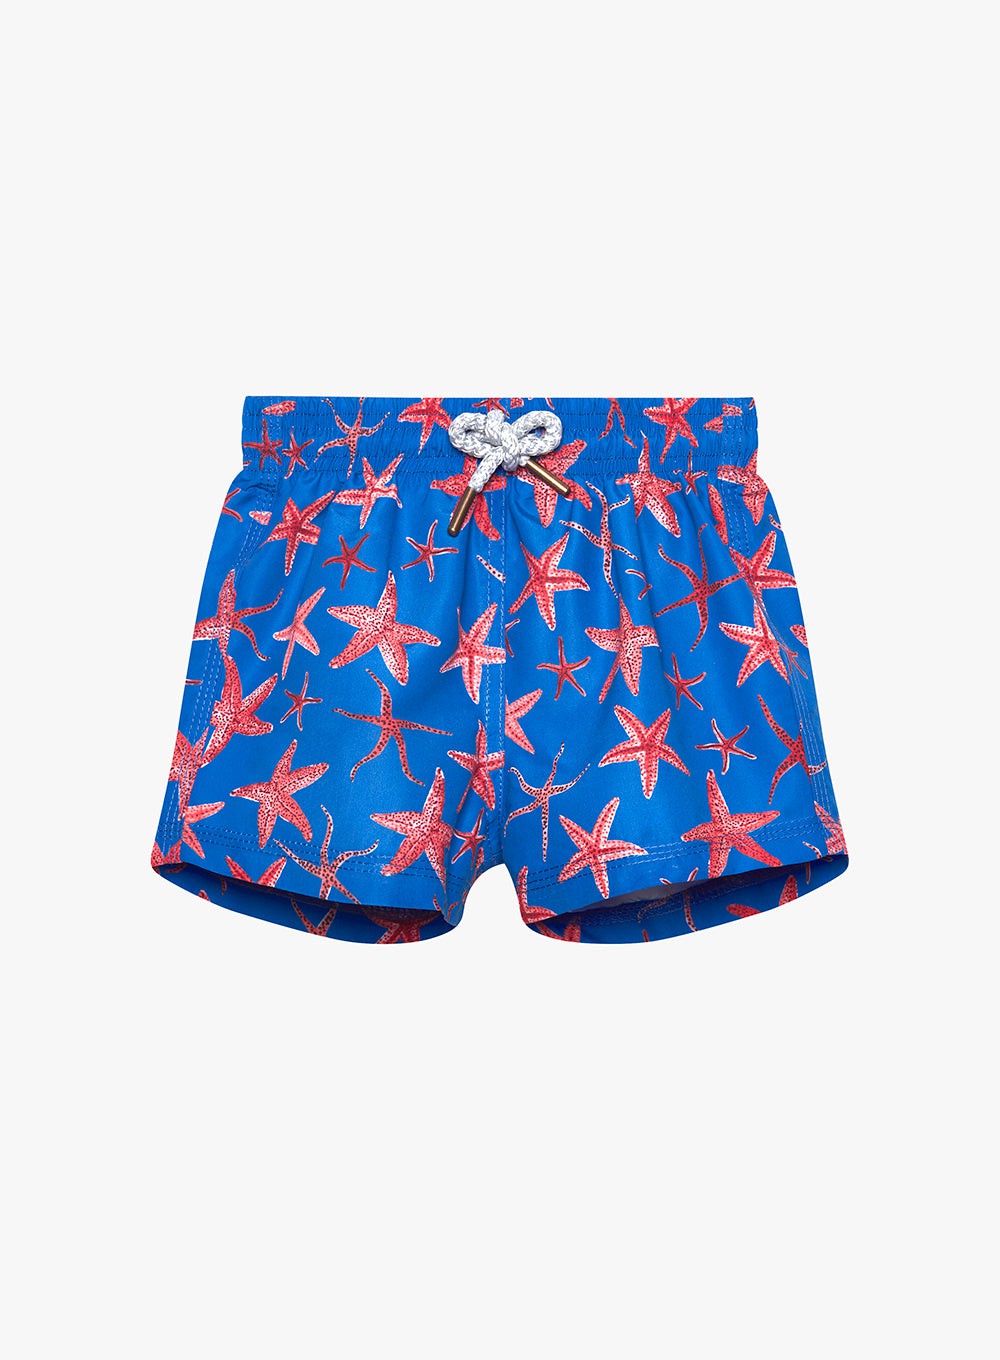 Trotters Swim Baby Boy Swimshorts in Blue Starfish Print | Trotters ...